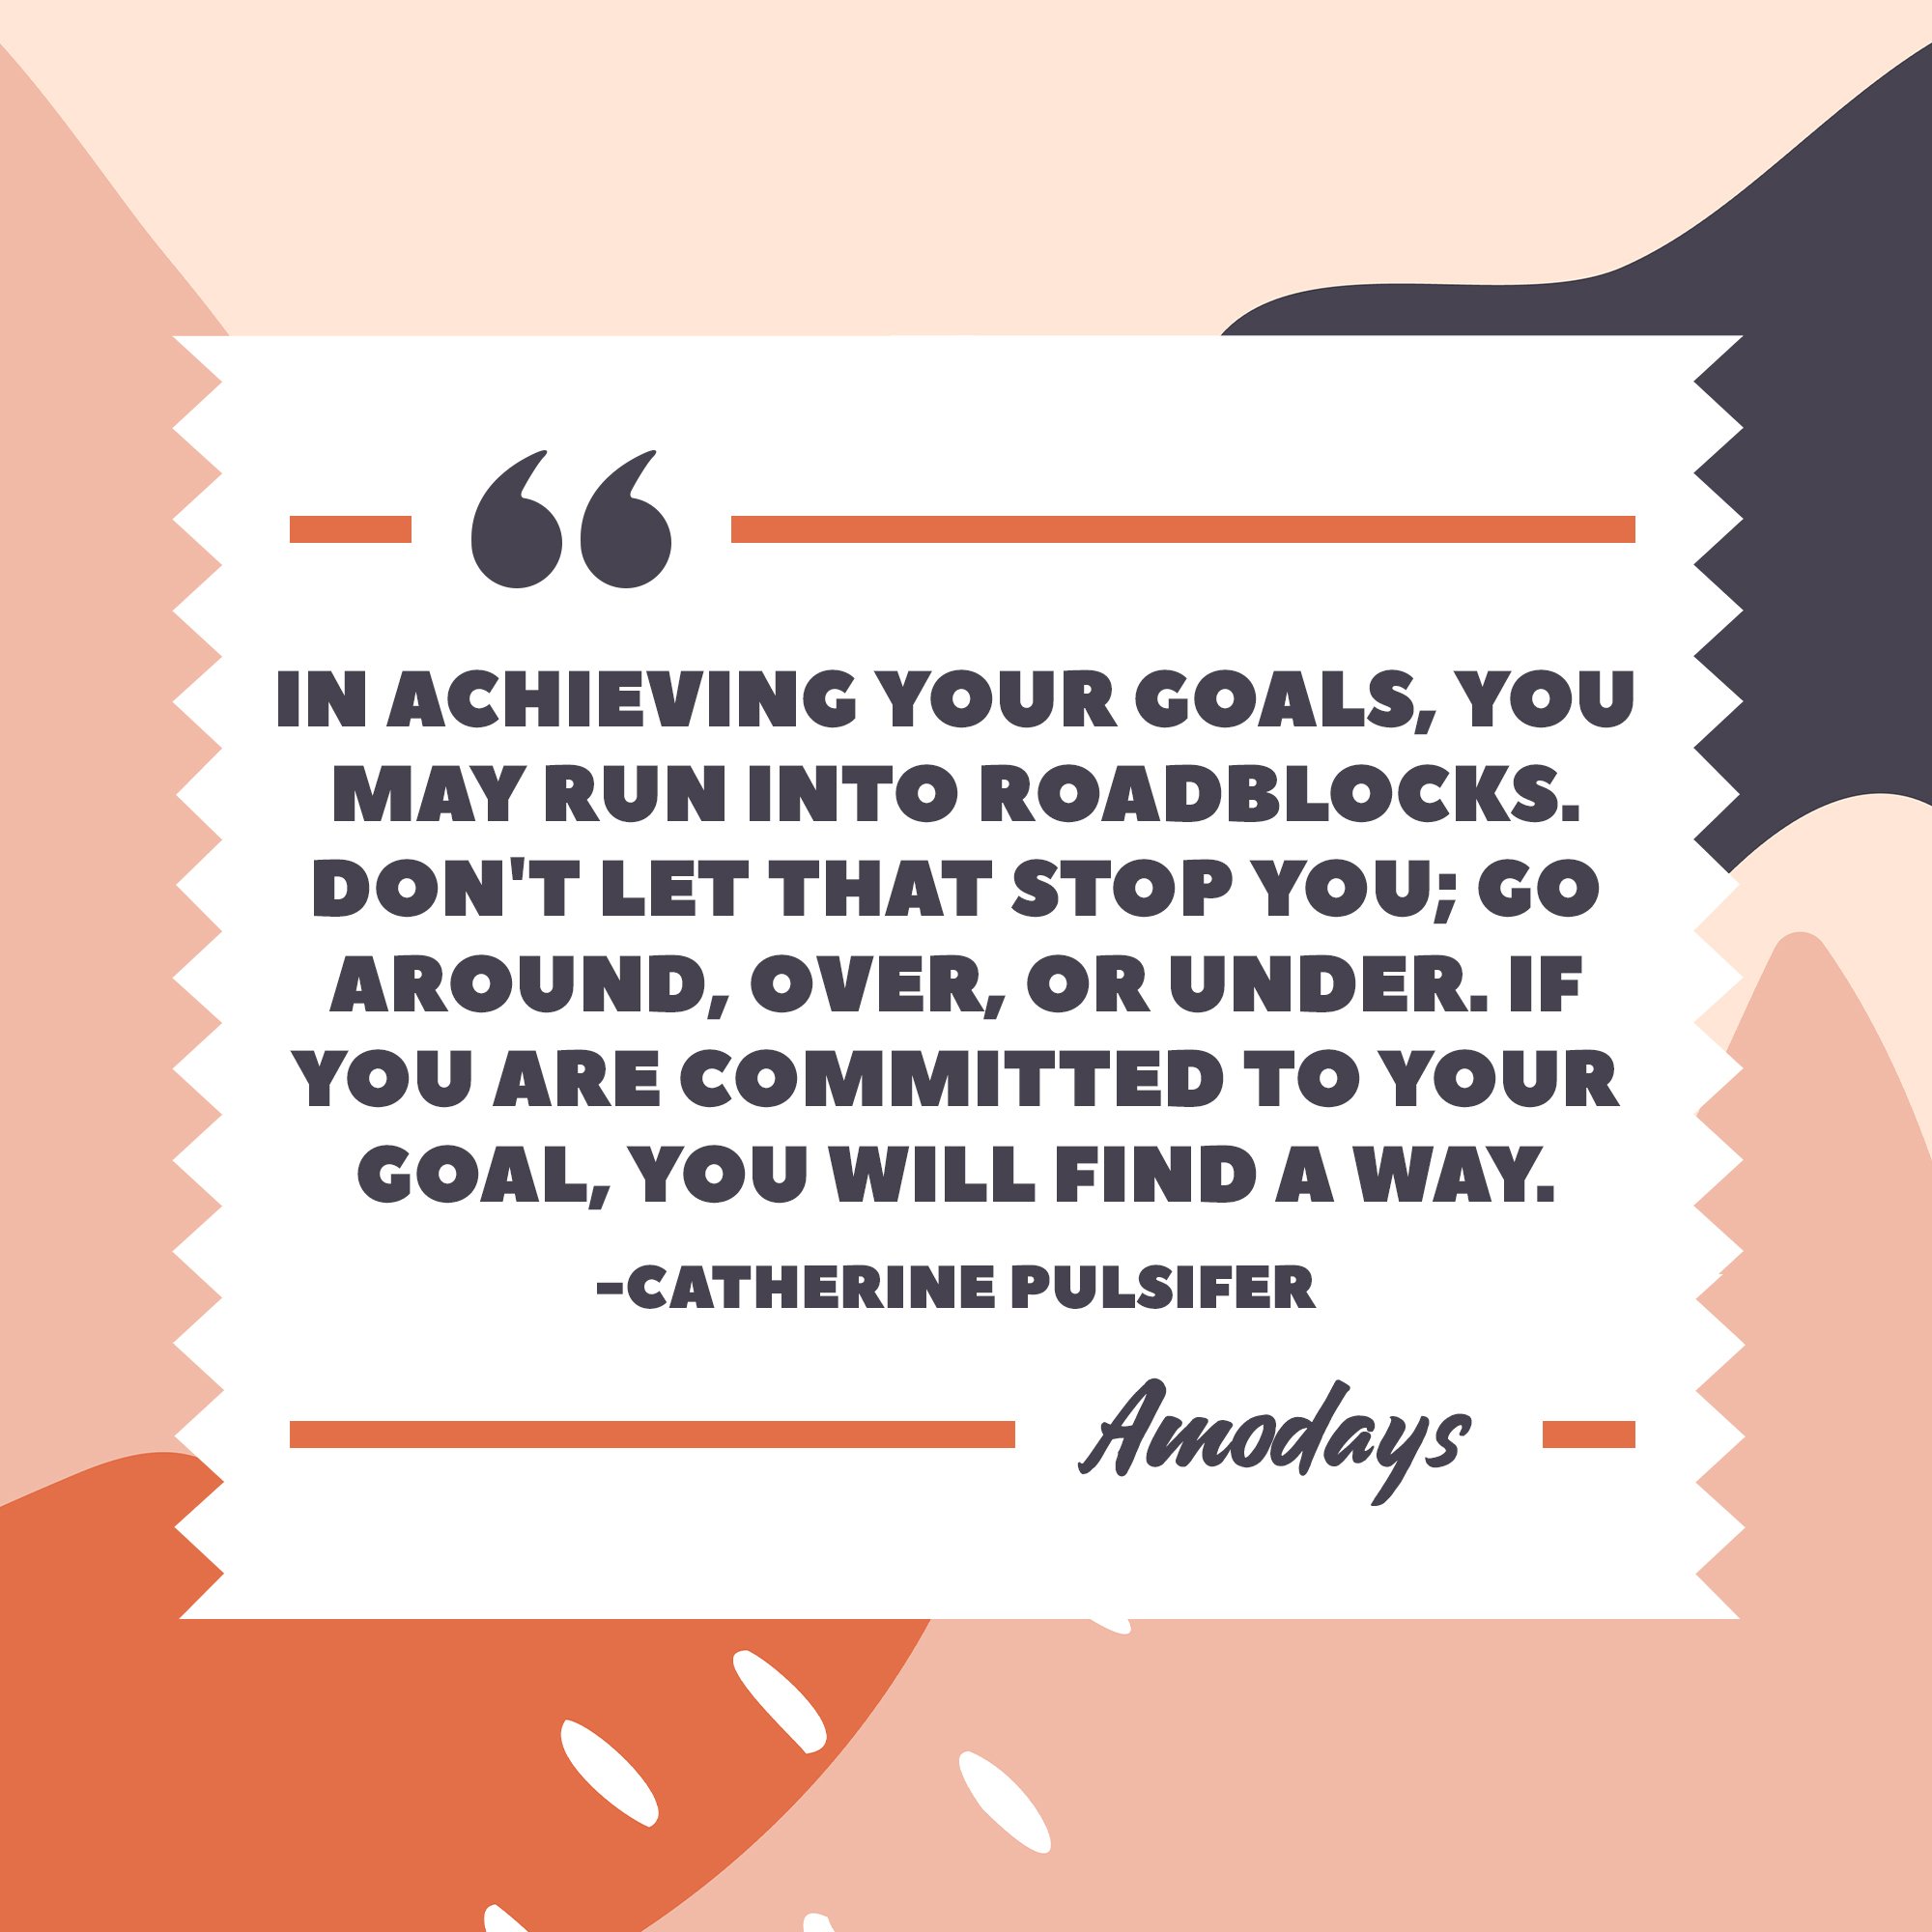 Catherine Pulsifer's quote: "In achieving your goals, you may run into roadblocks. Don't let that stop you; go around, over, or under. If you are committed to your goal, you will find a way." | Image: AmoDays